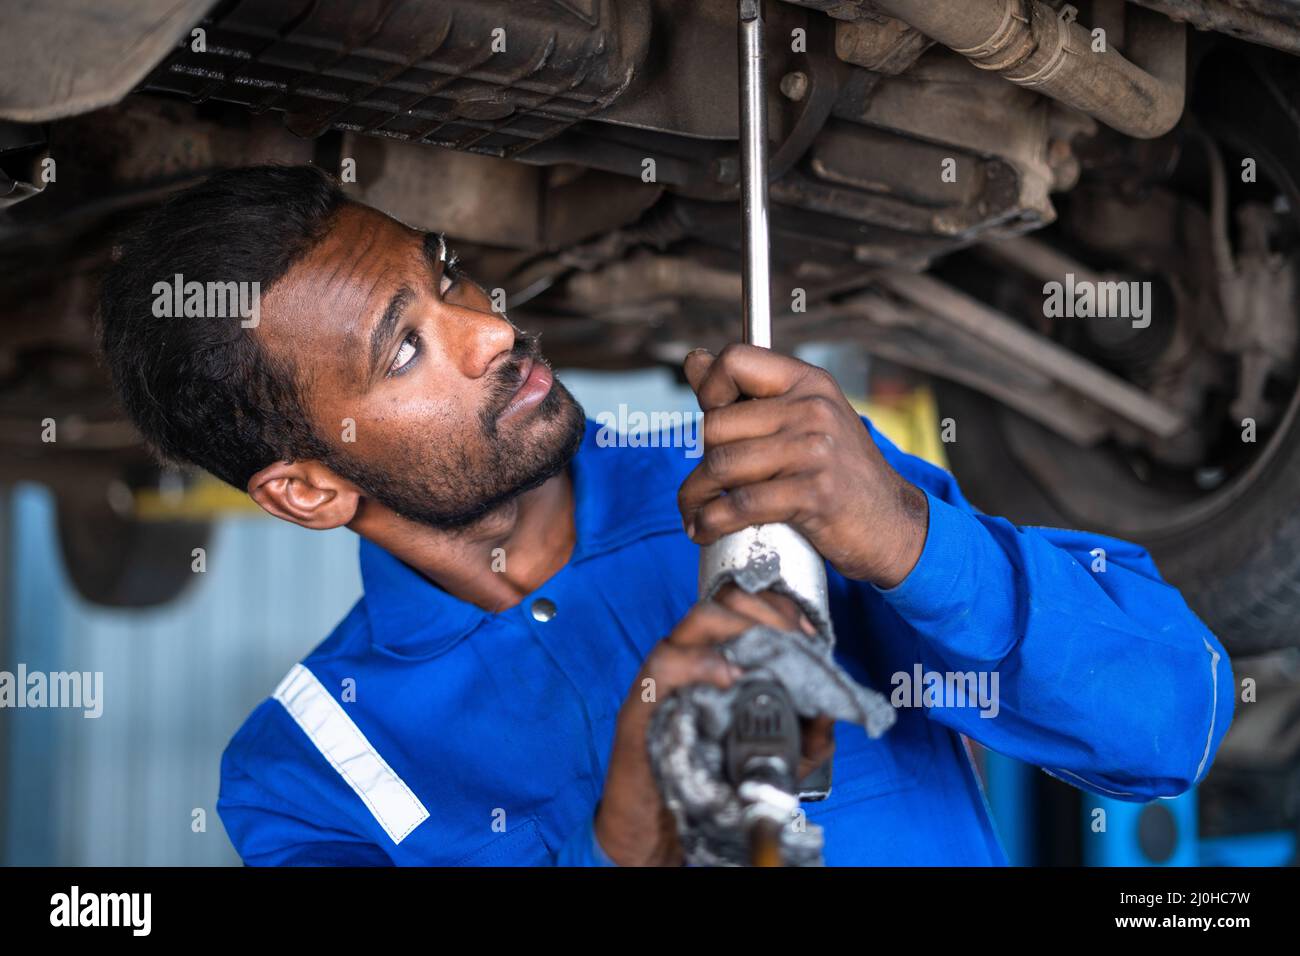 Professional mechanical tools for auto service and car repair. Workshop  equipment Stock Photo - Alamy